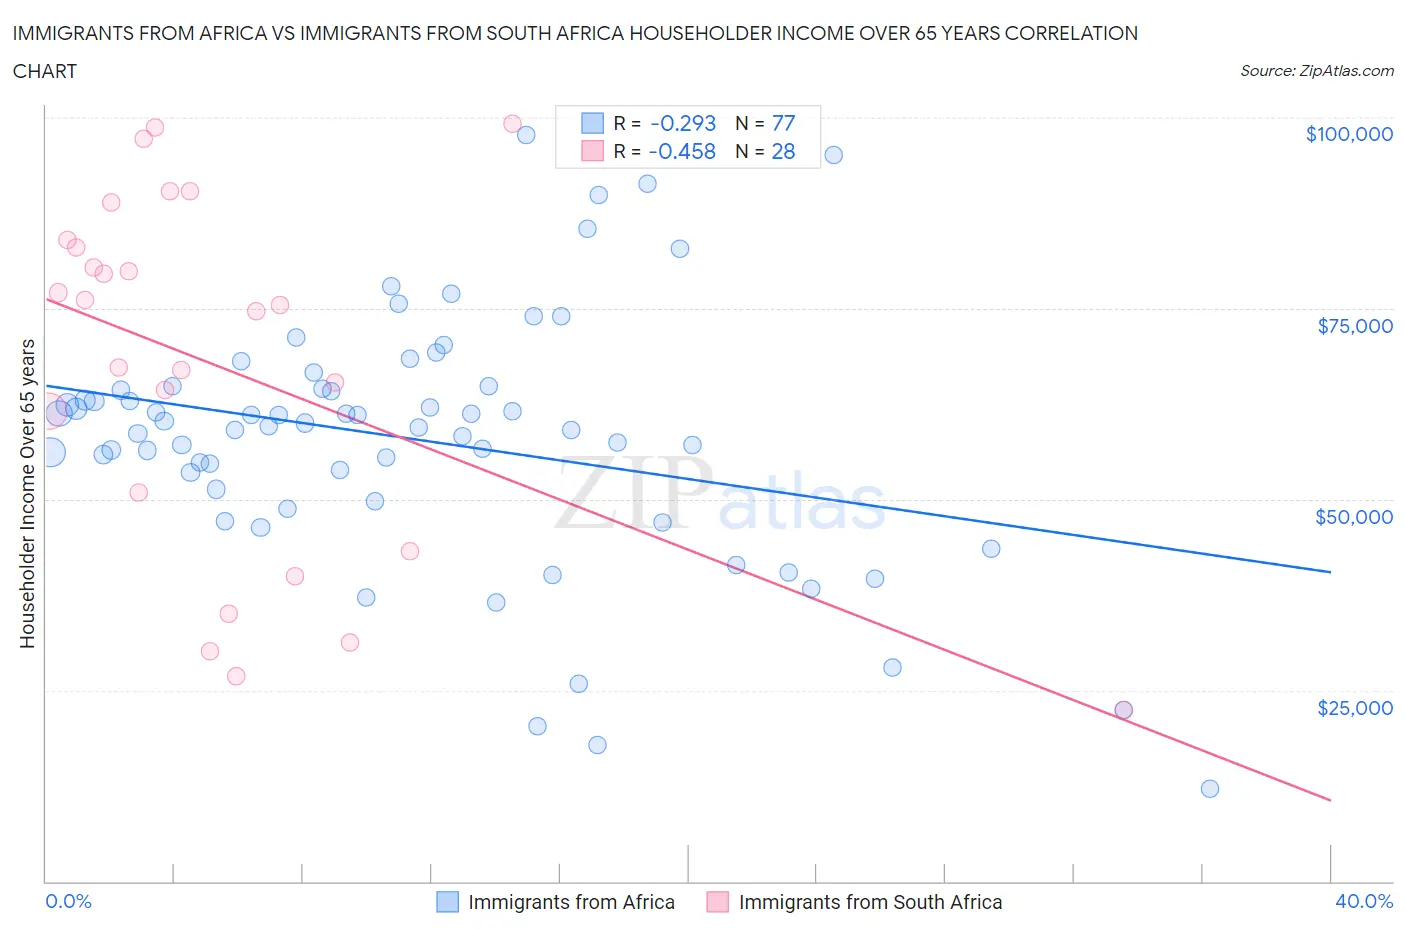 Immigrants from Africa vs Immigrants from South Africa Householder Income Over 65 years